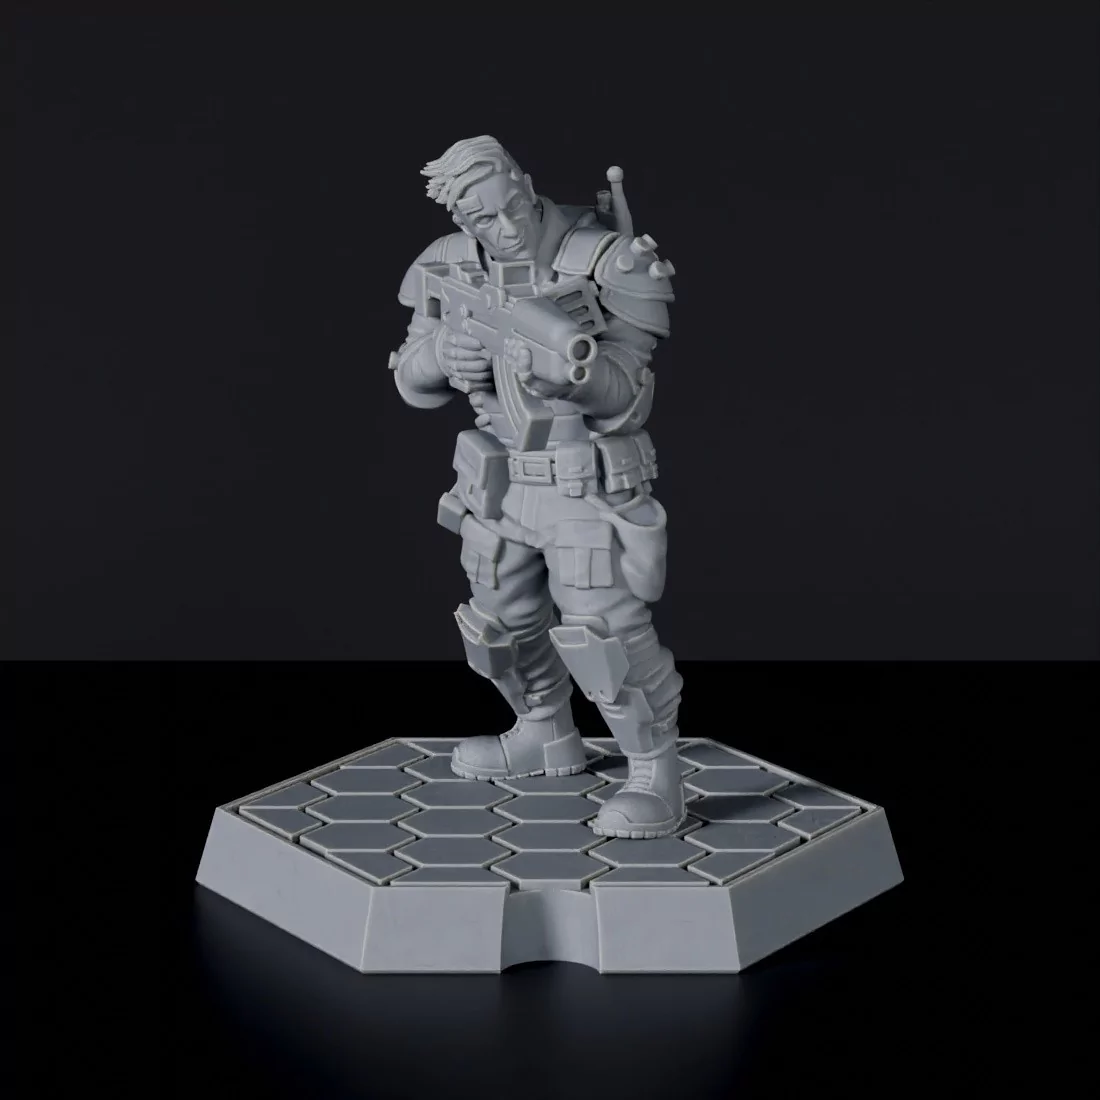 Futuristic miniature of police officer with gun and backpack - Officer Michael Blender for Gridwars TCPD army